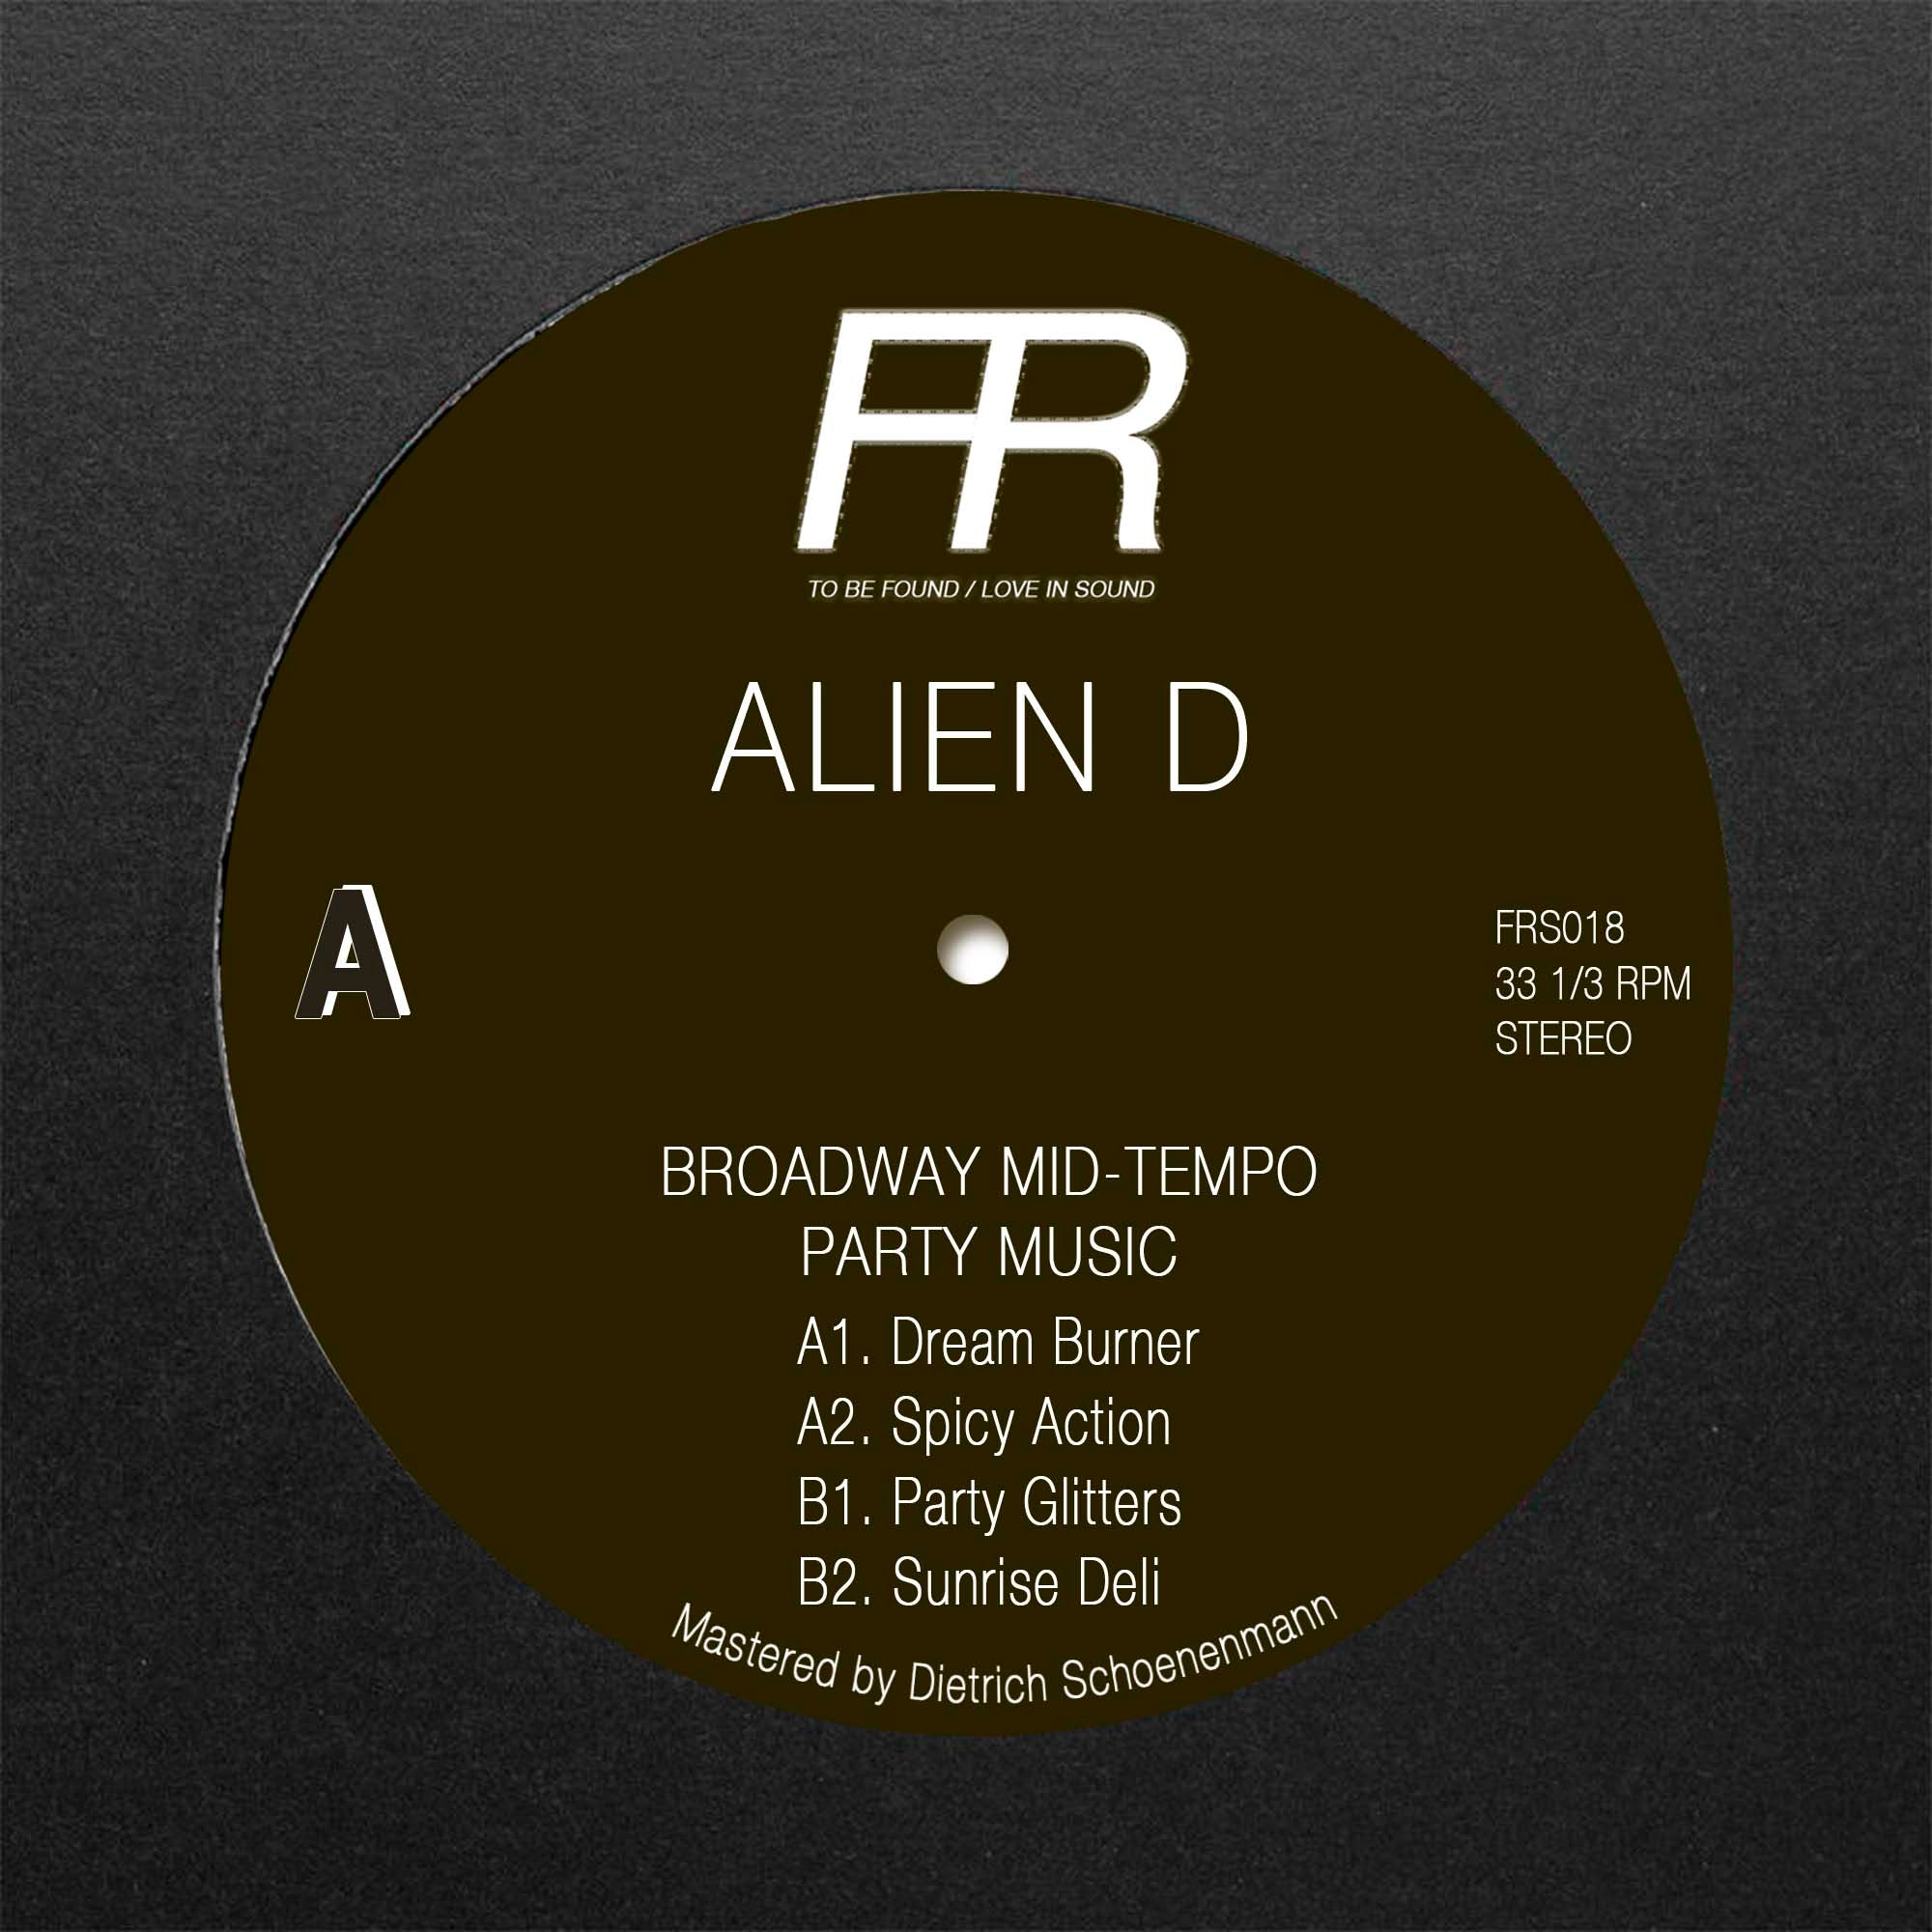 Alien D - Broadway Mid-Tempo Party Music [NEW]